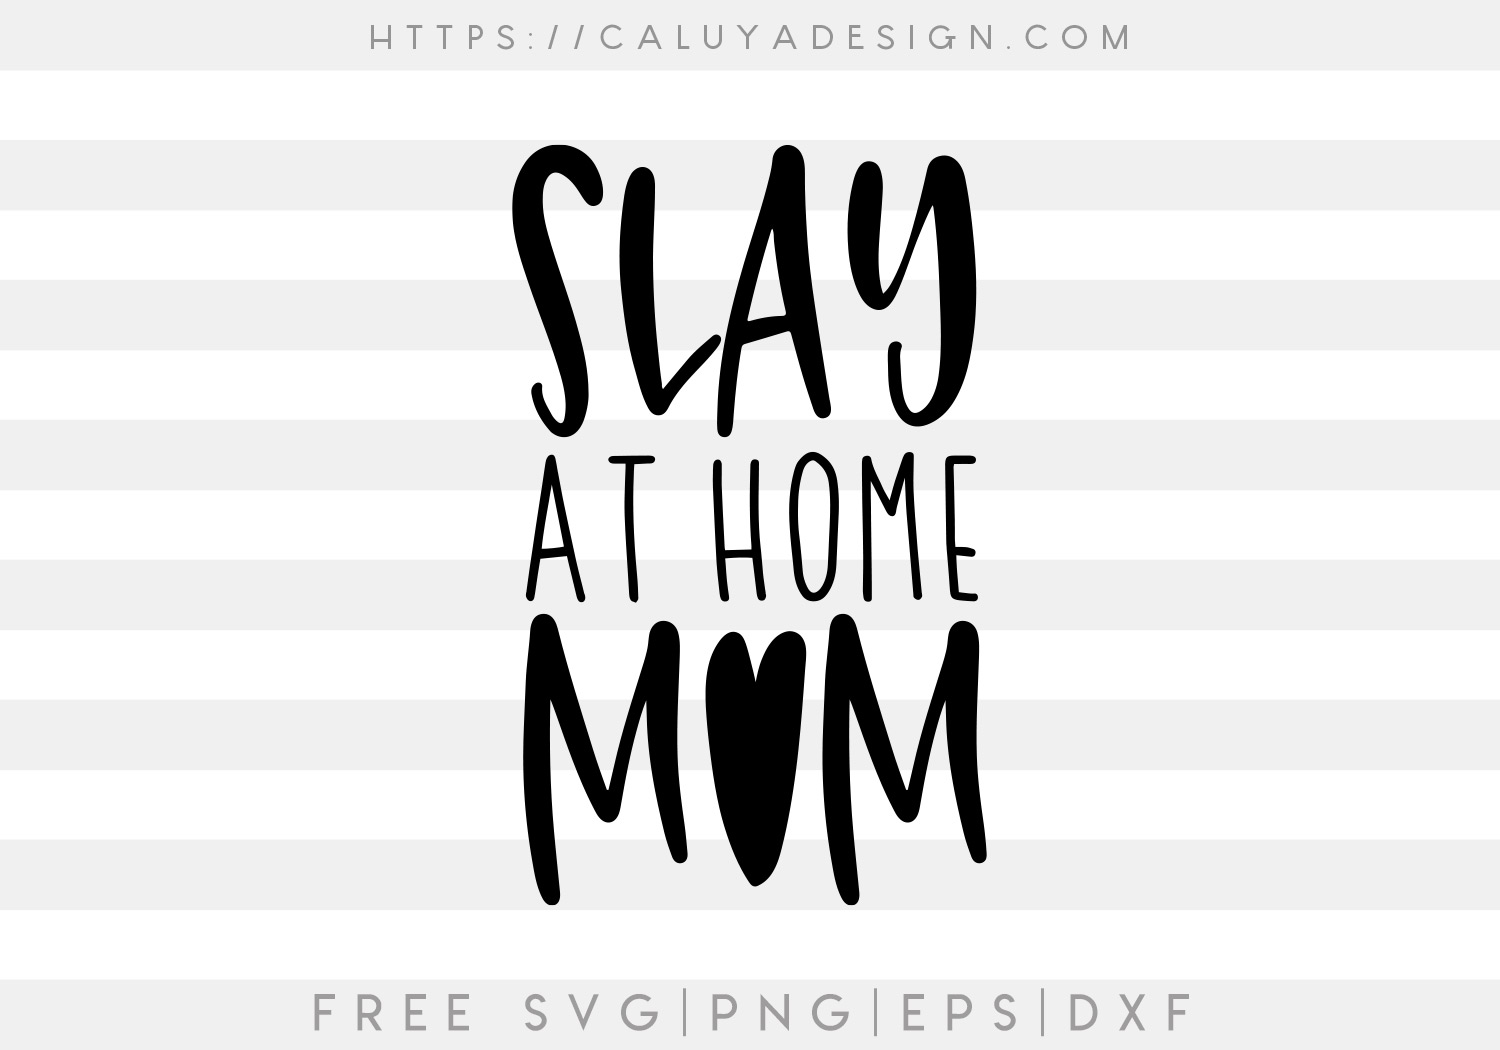 Slay At Home Mom SVG, PNG, EPS & DXF